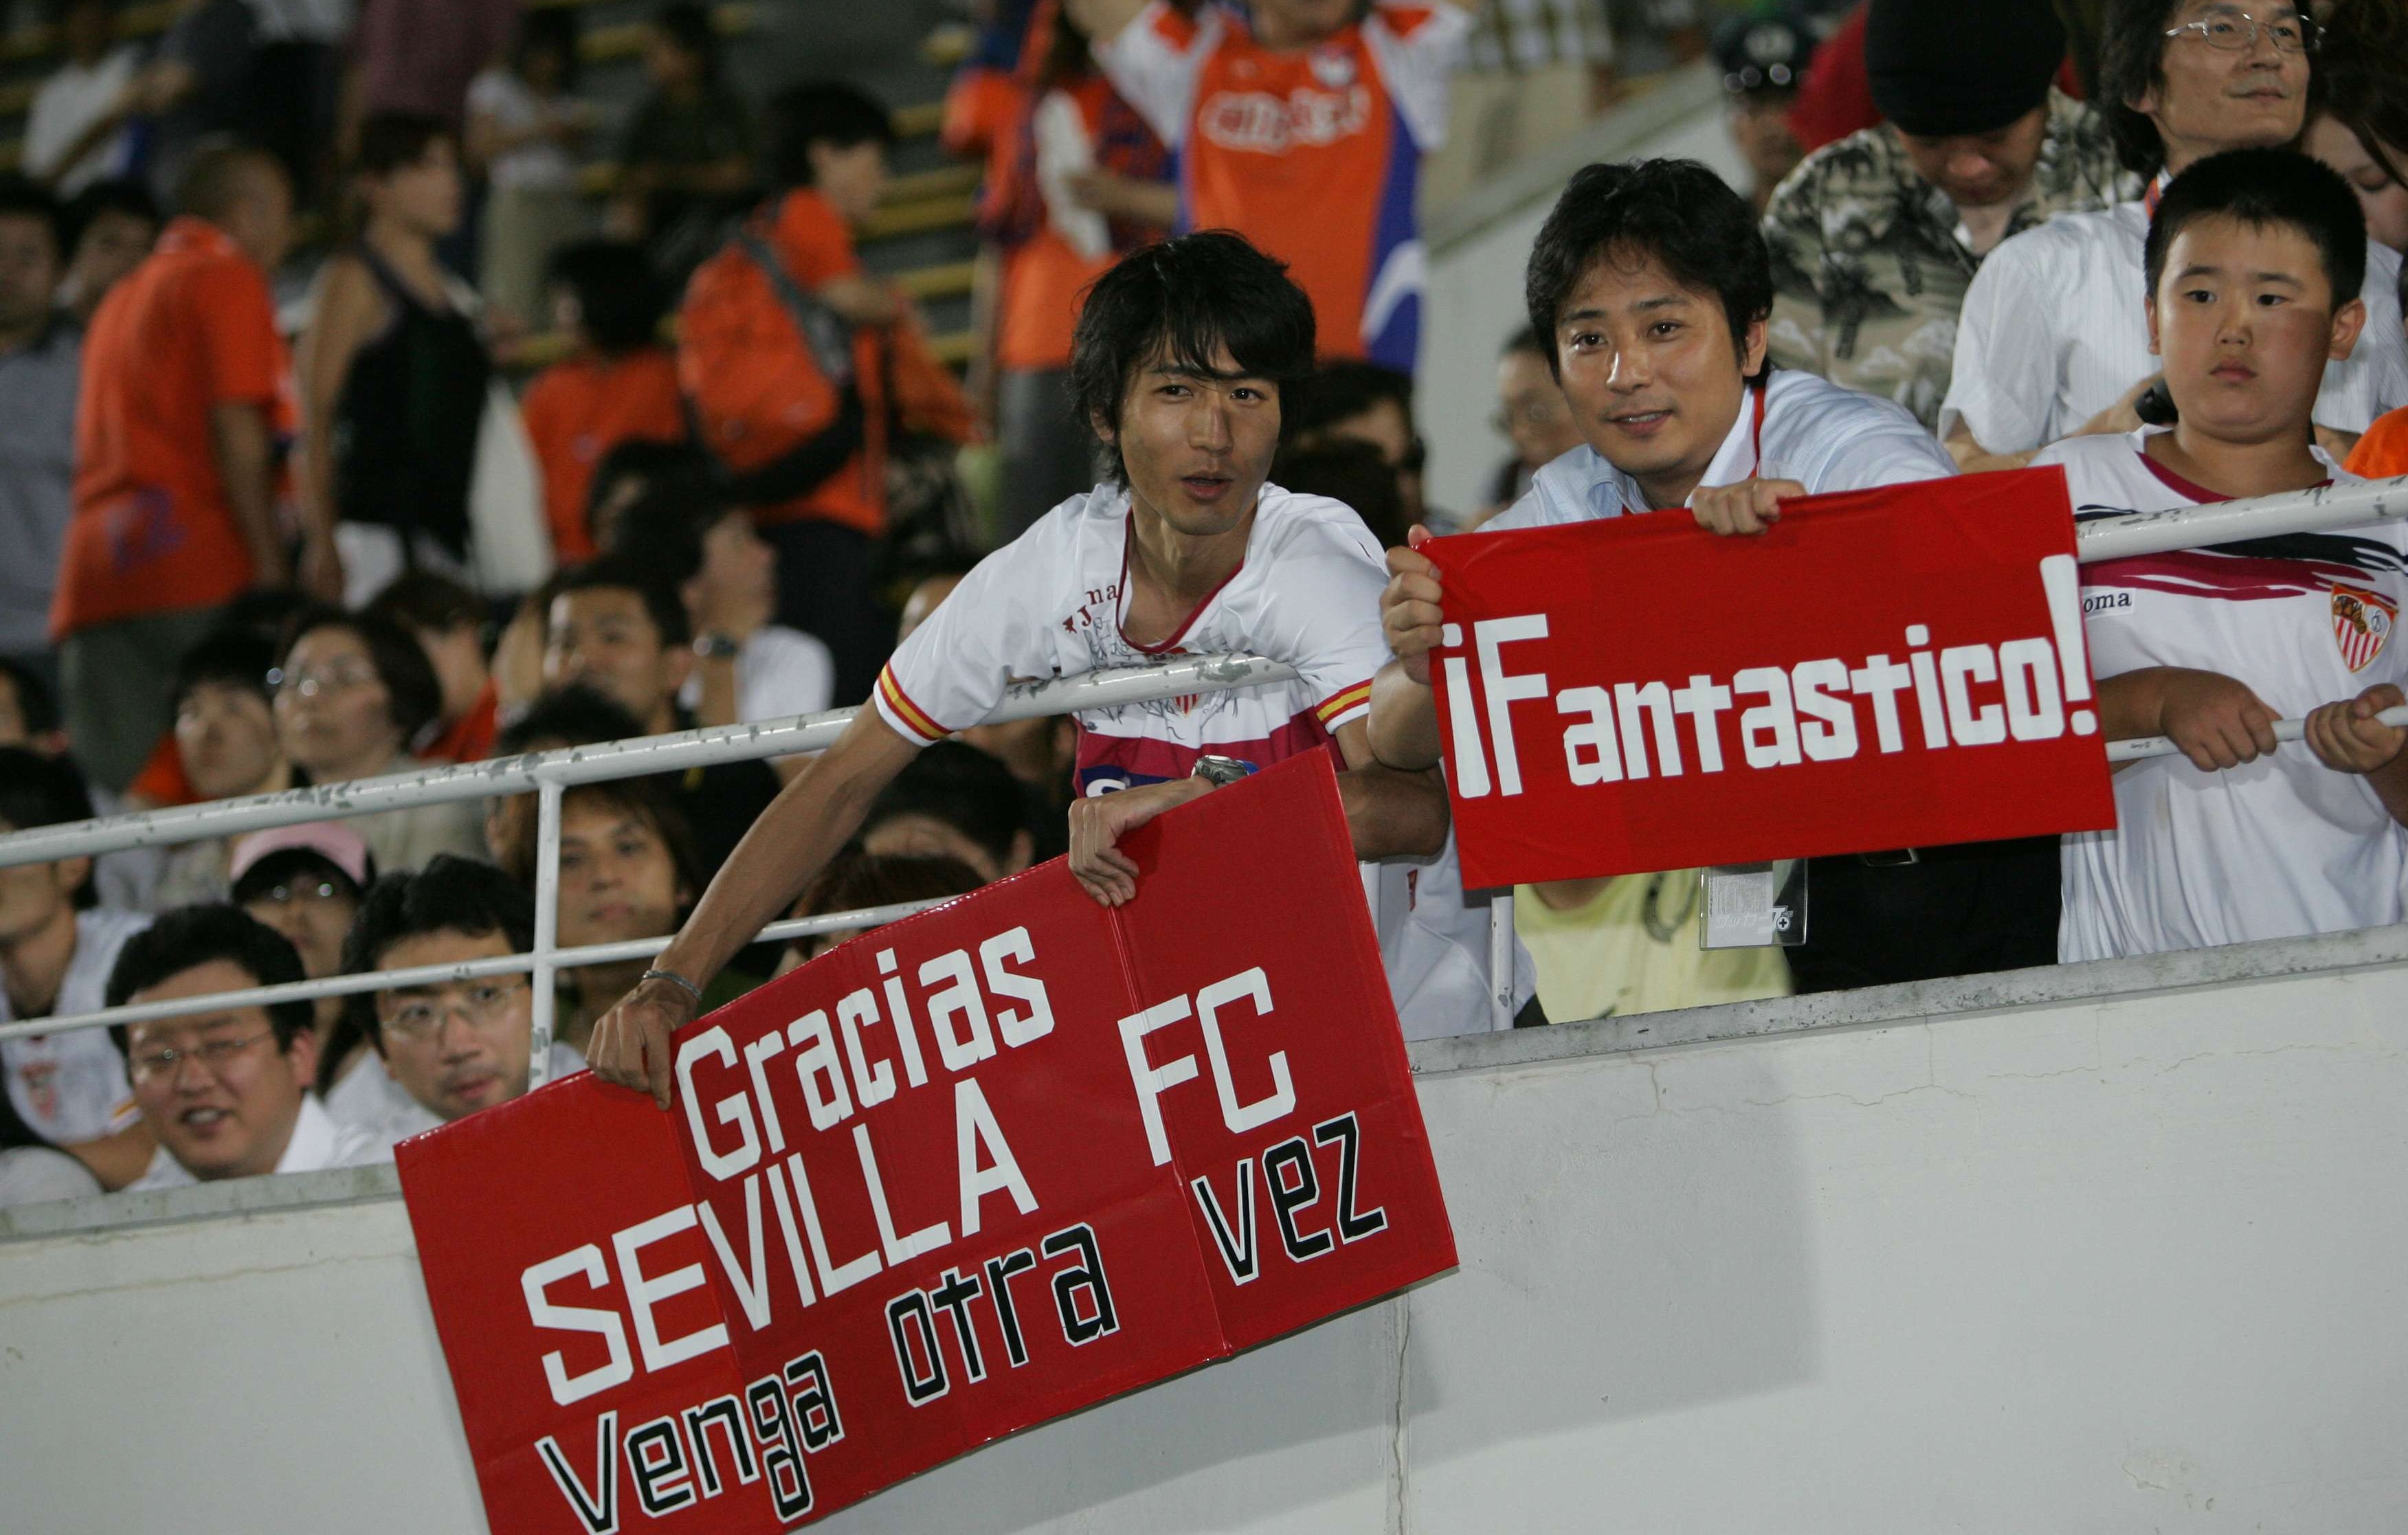 Sevilla fans in Japan during the tour in 2006